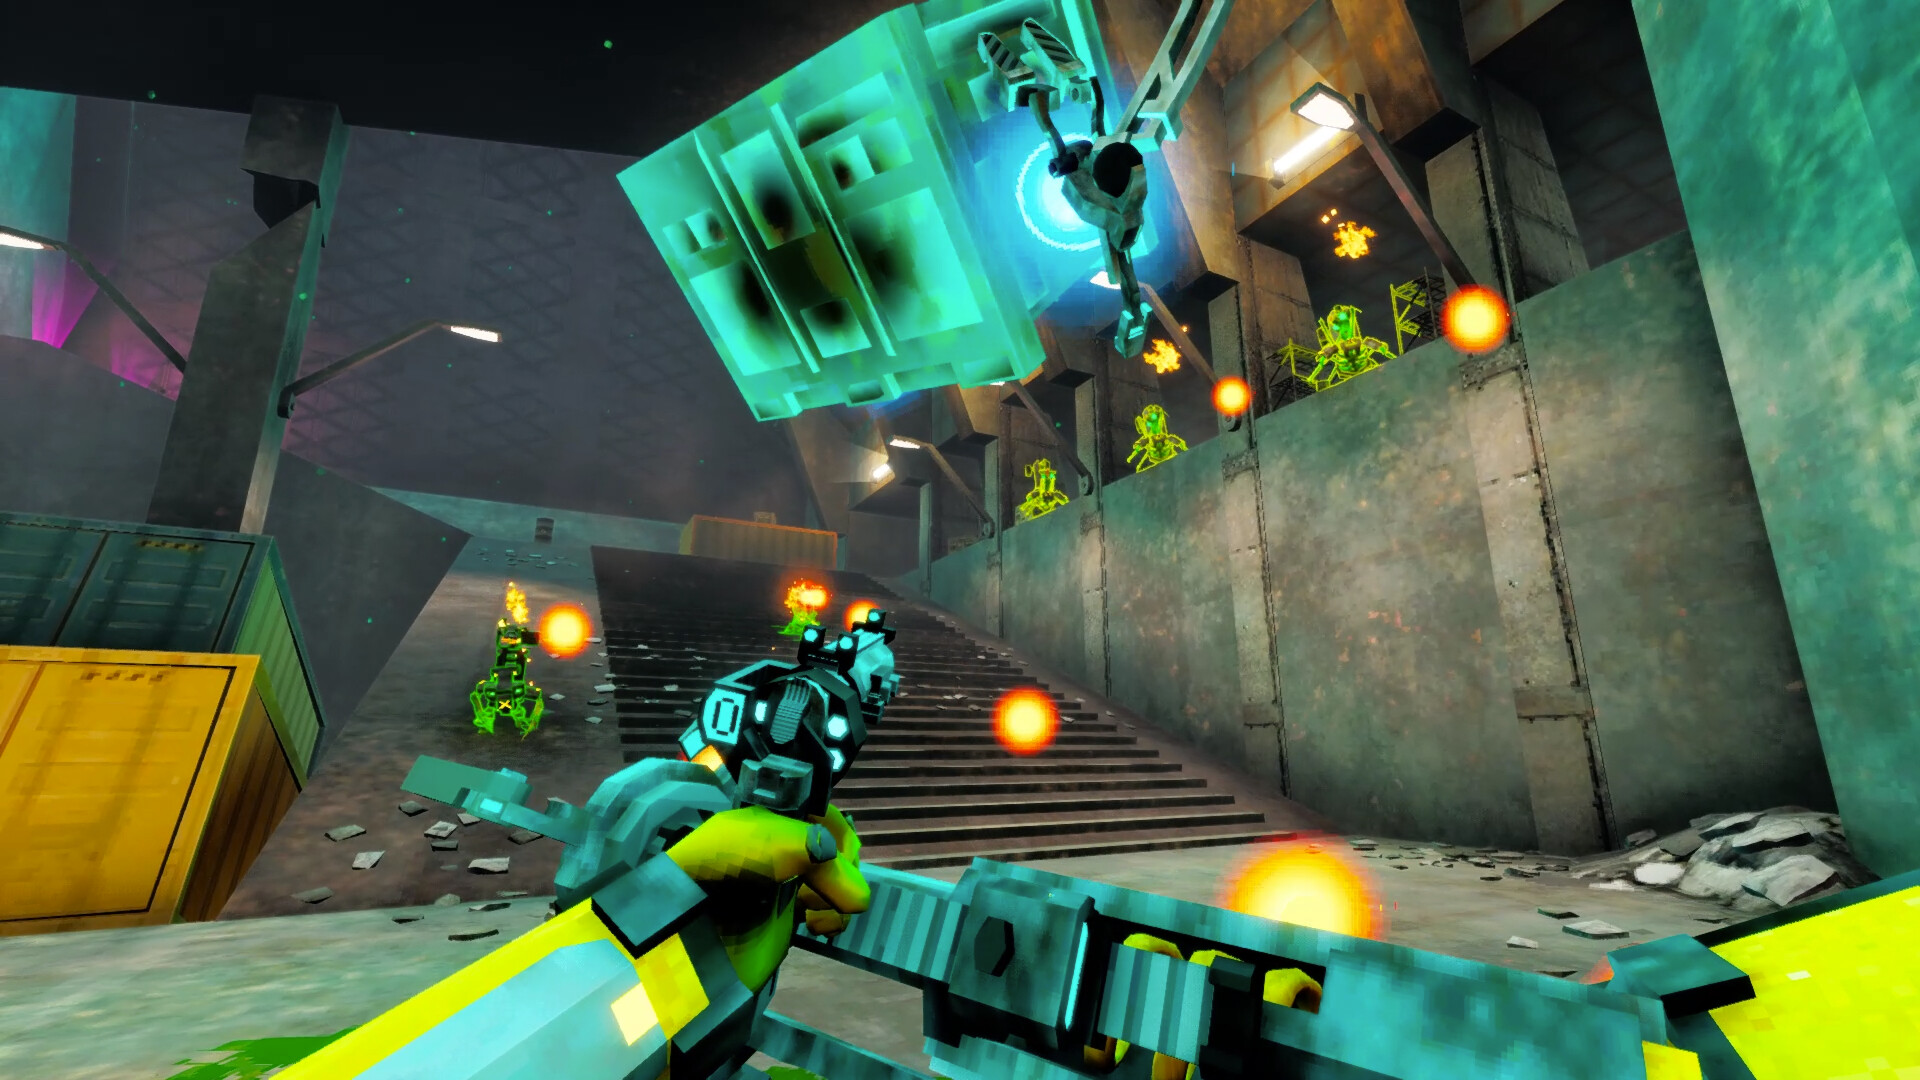 Exocide is a bug-squashing boomer shooter where you play a four-armed exterminator